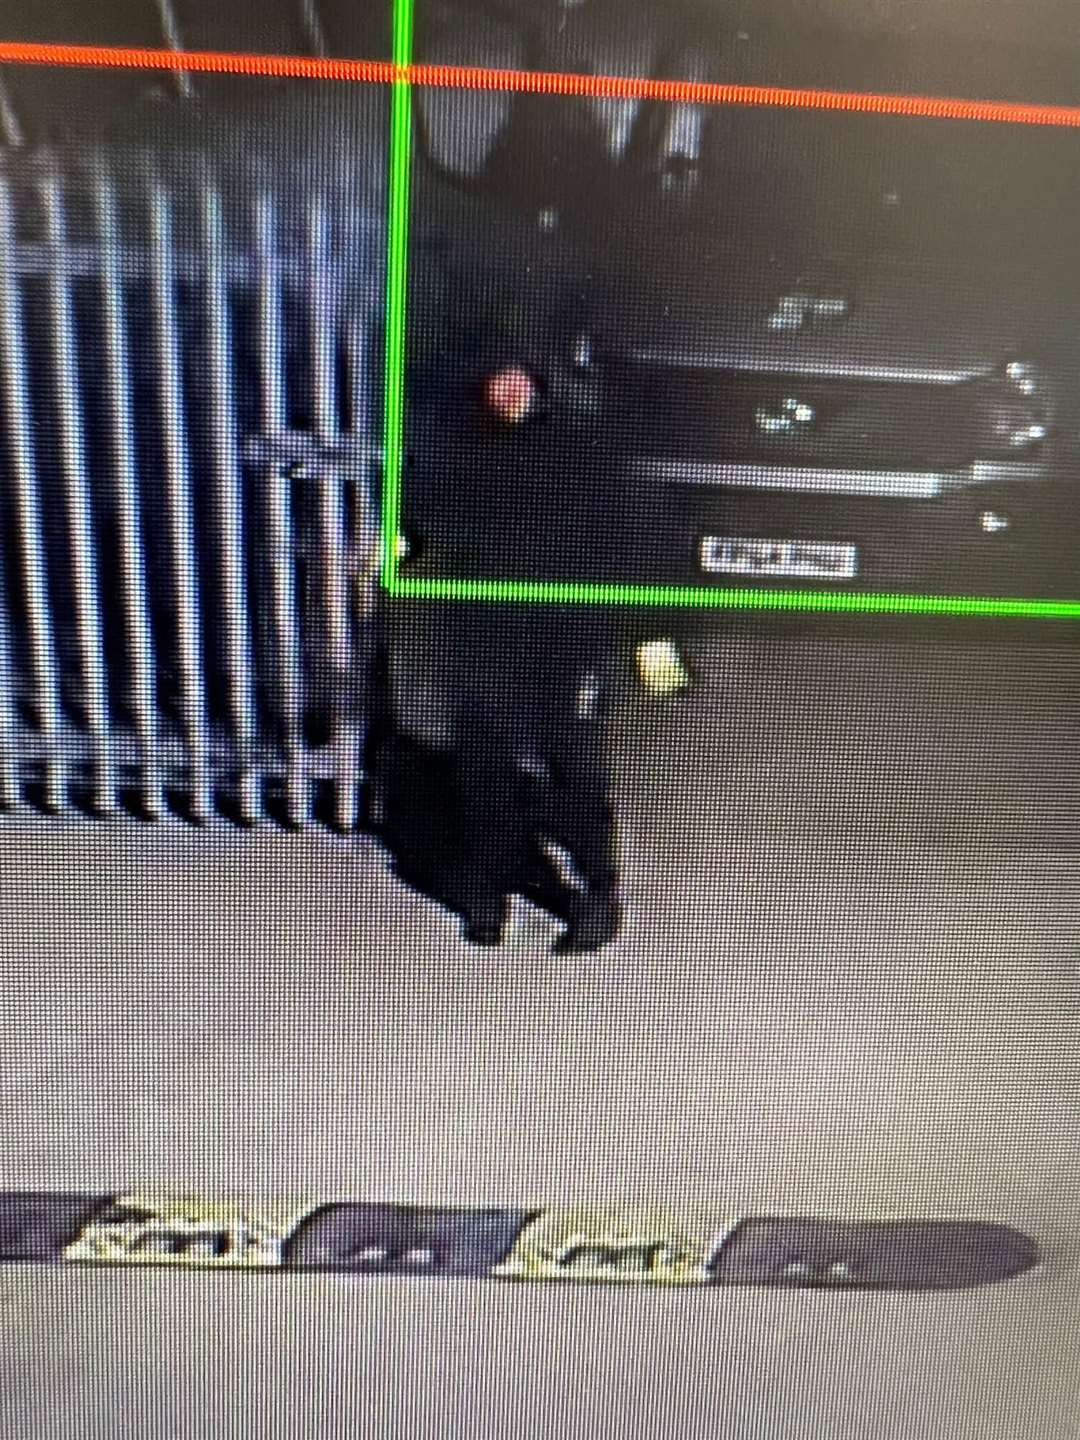 Two of the thieves caught on security camera breaking into CDDL Recycling's compound